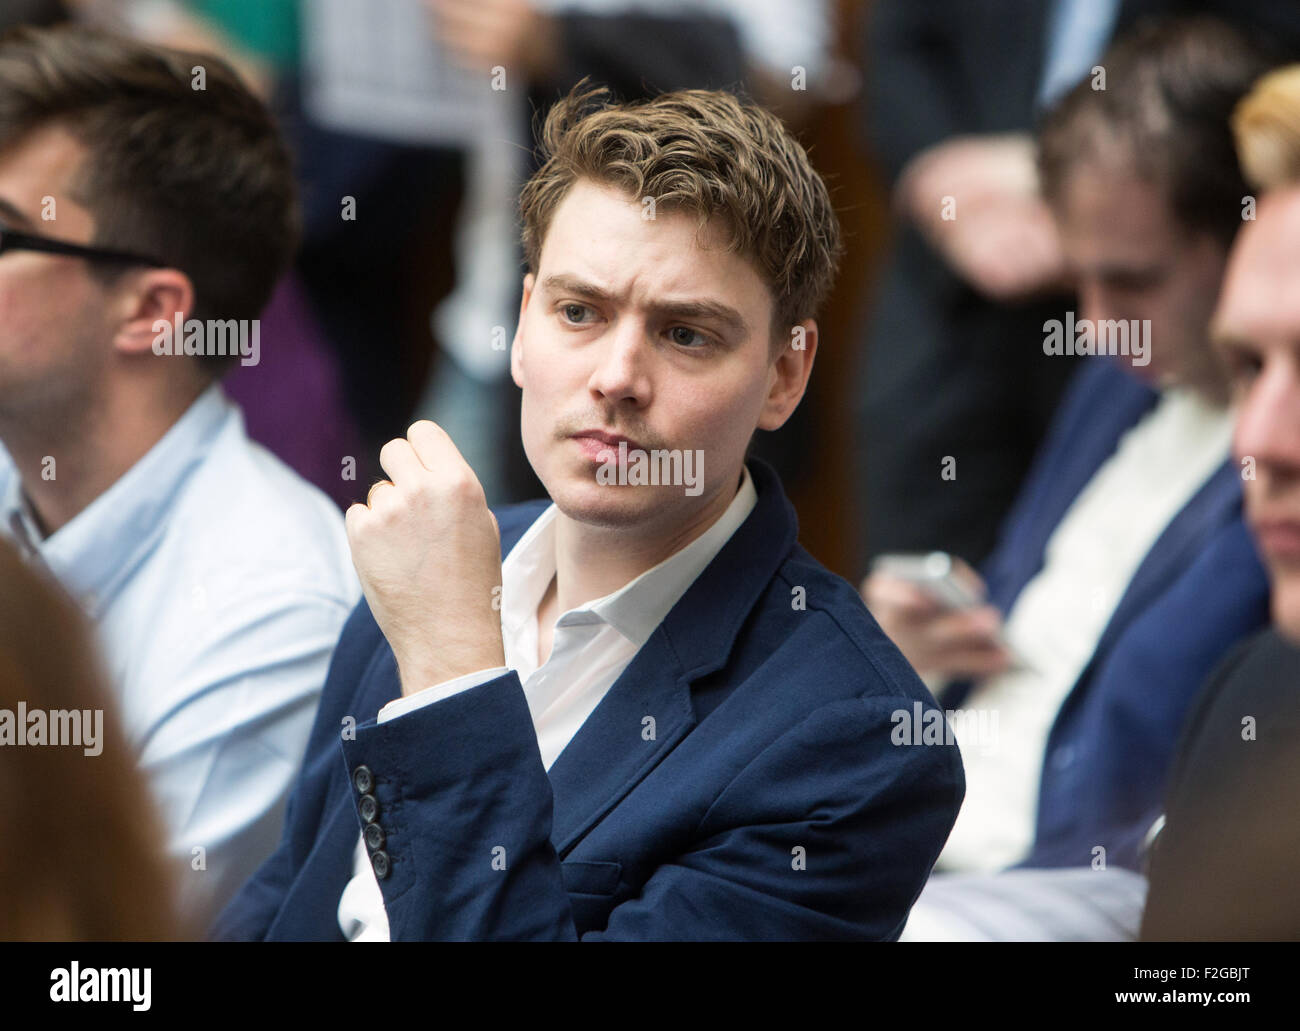 The eldest son of former Prime Minister Tony Blair was among those who turned out to listen to prospective Labour leaders. Stock Photo